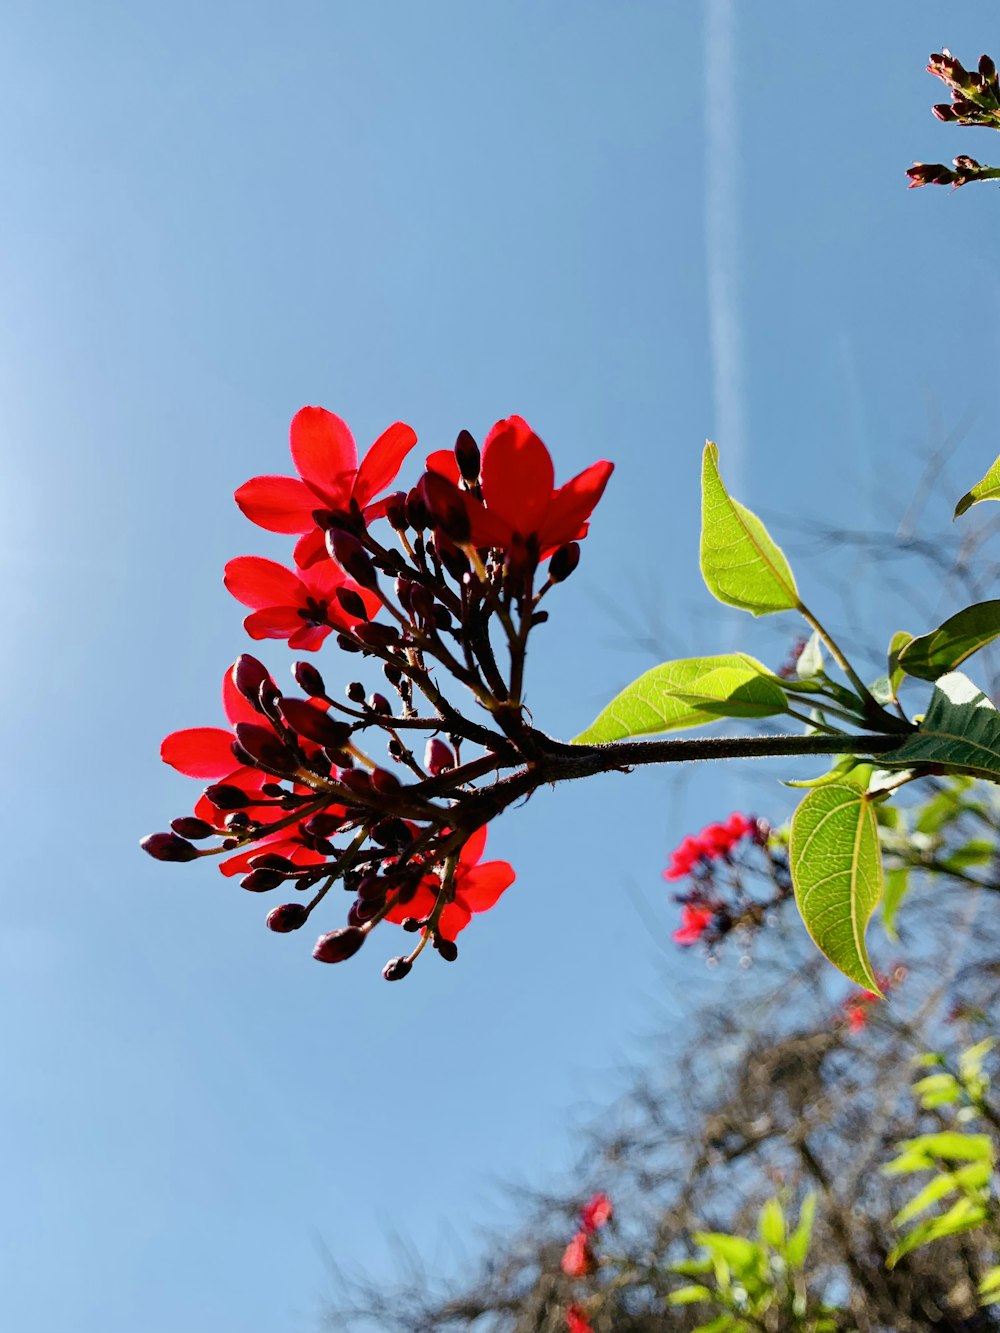 a branch with red flowers and leaves against a blue sky